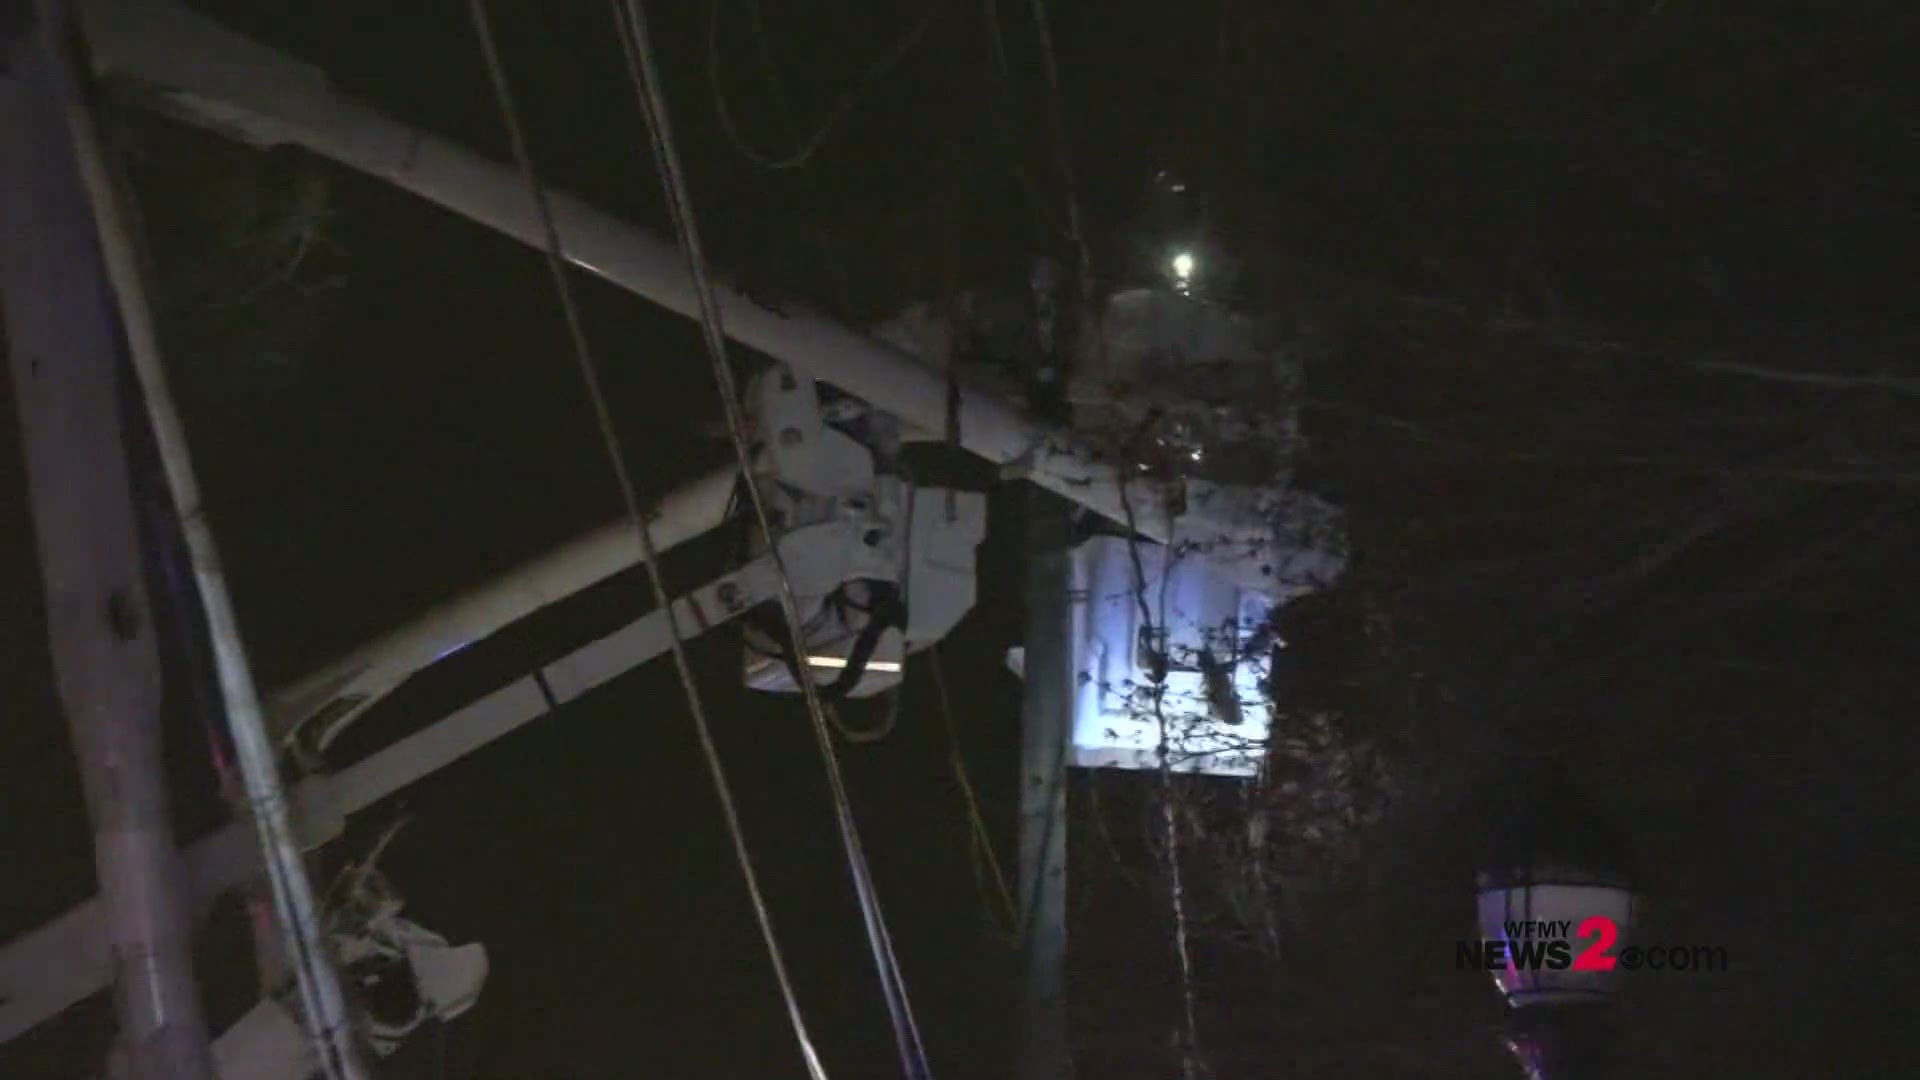 Duke Energy crews are working to restore power to more than 300 customers in Guilford county.